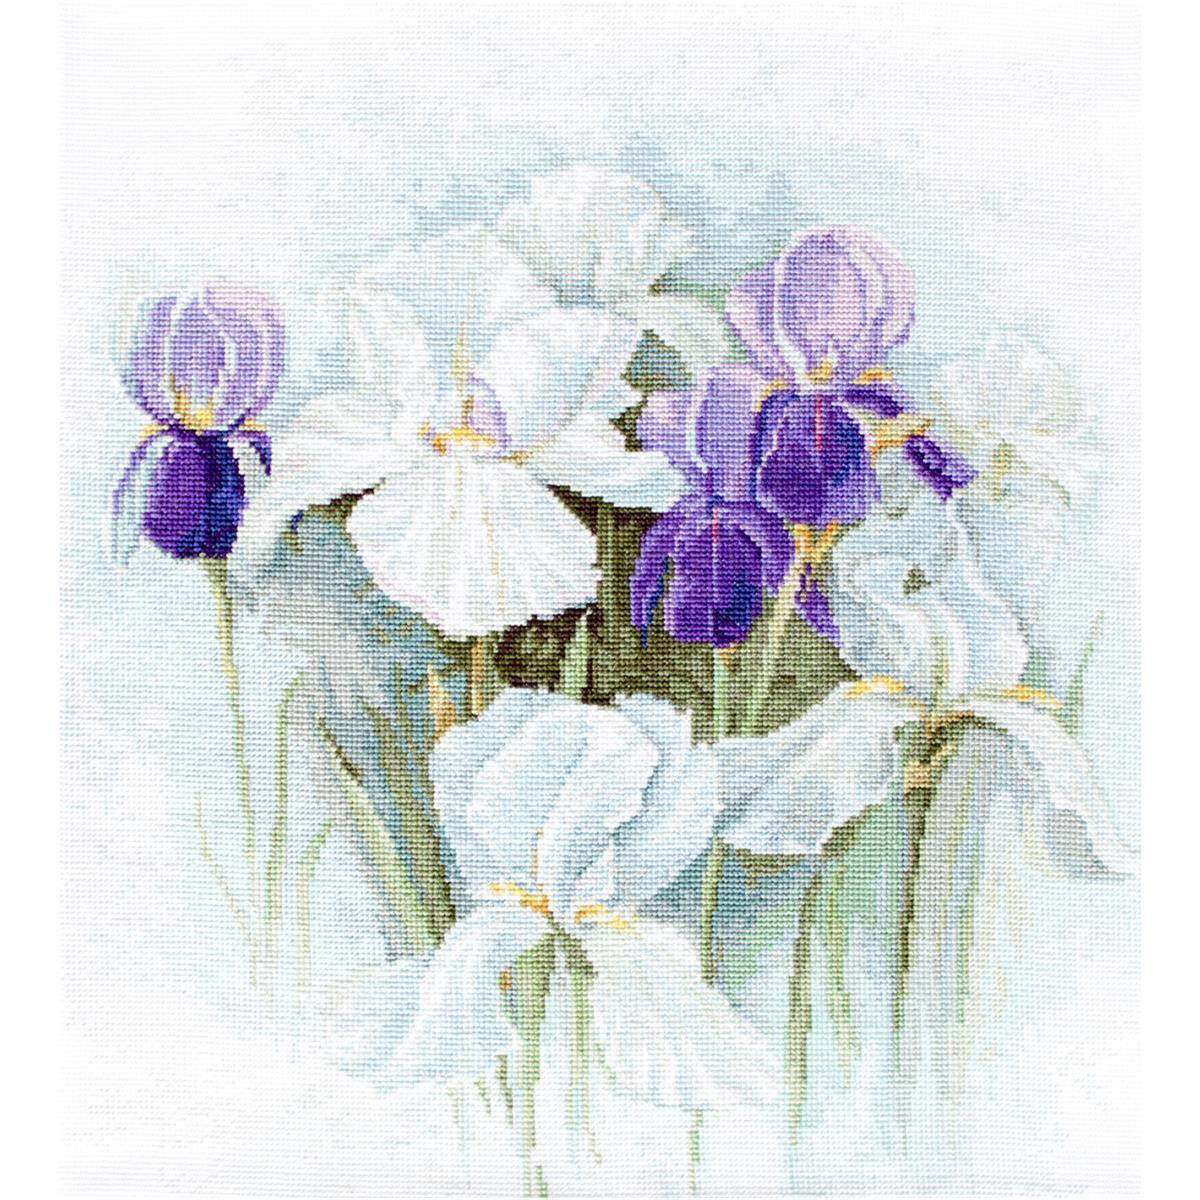 A watercolor depicting a cluster of iris flowers...